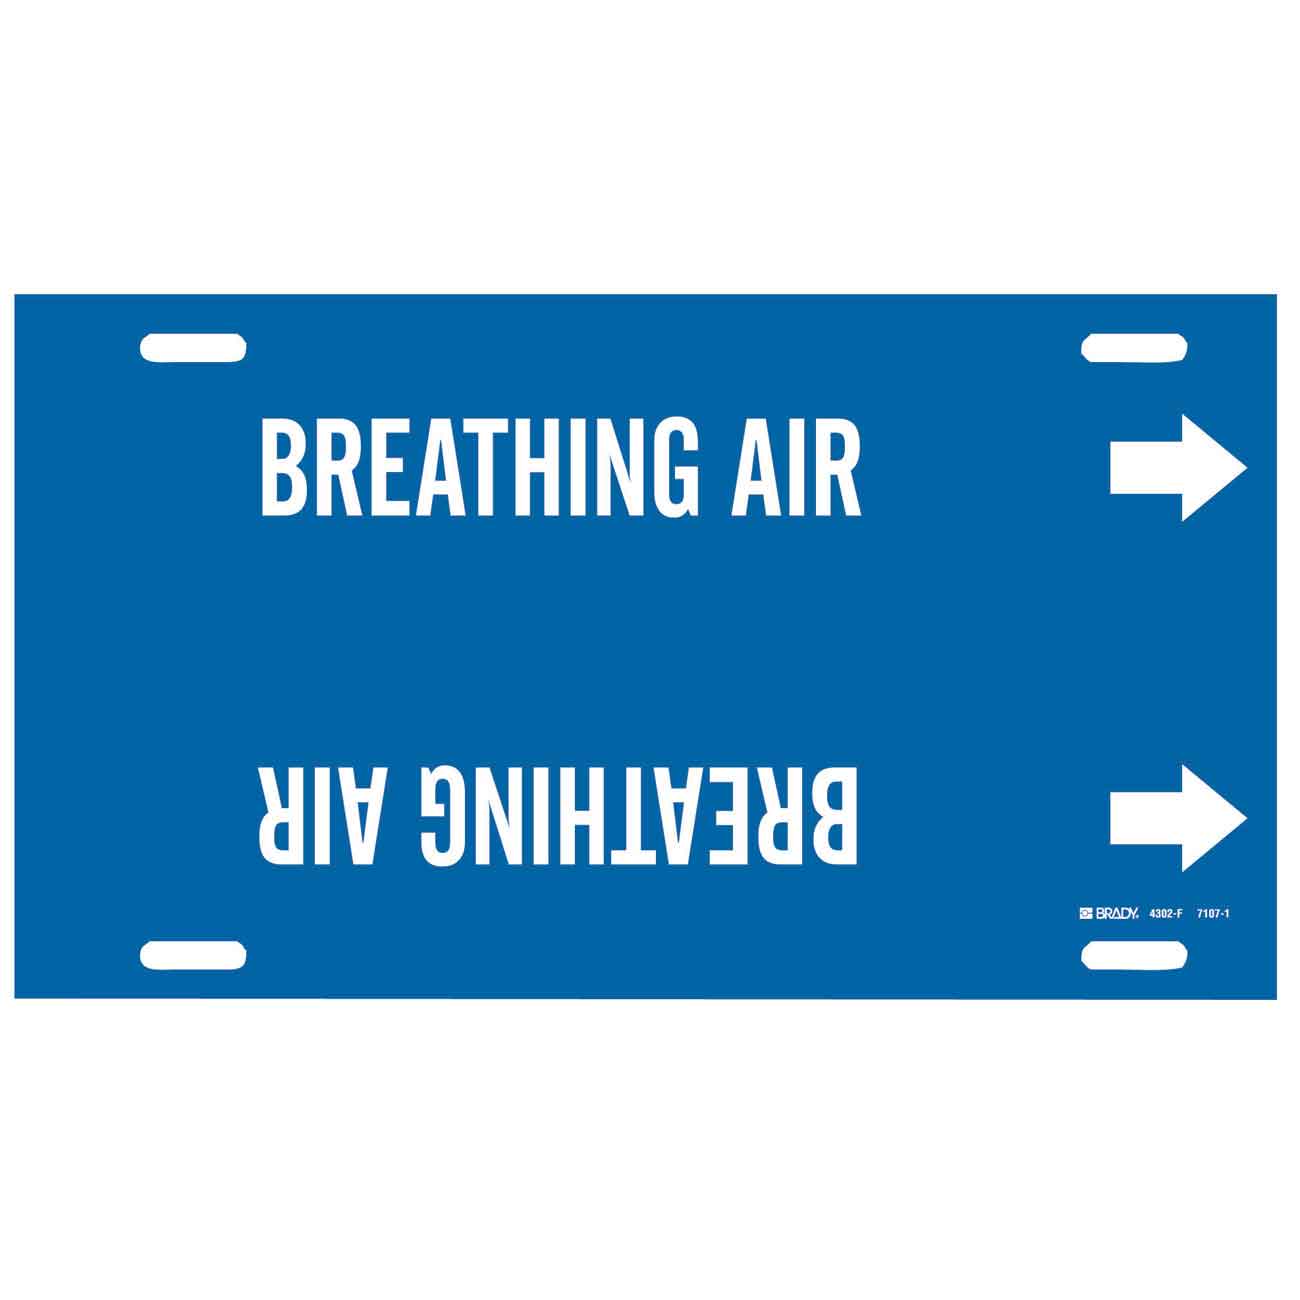 Legend Breathing Air Legend Breathing Air Brady 4302-F White on Blue Strap-On Pipe Marker 